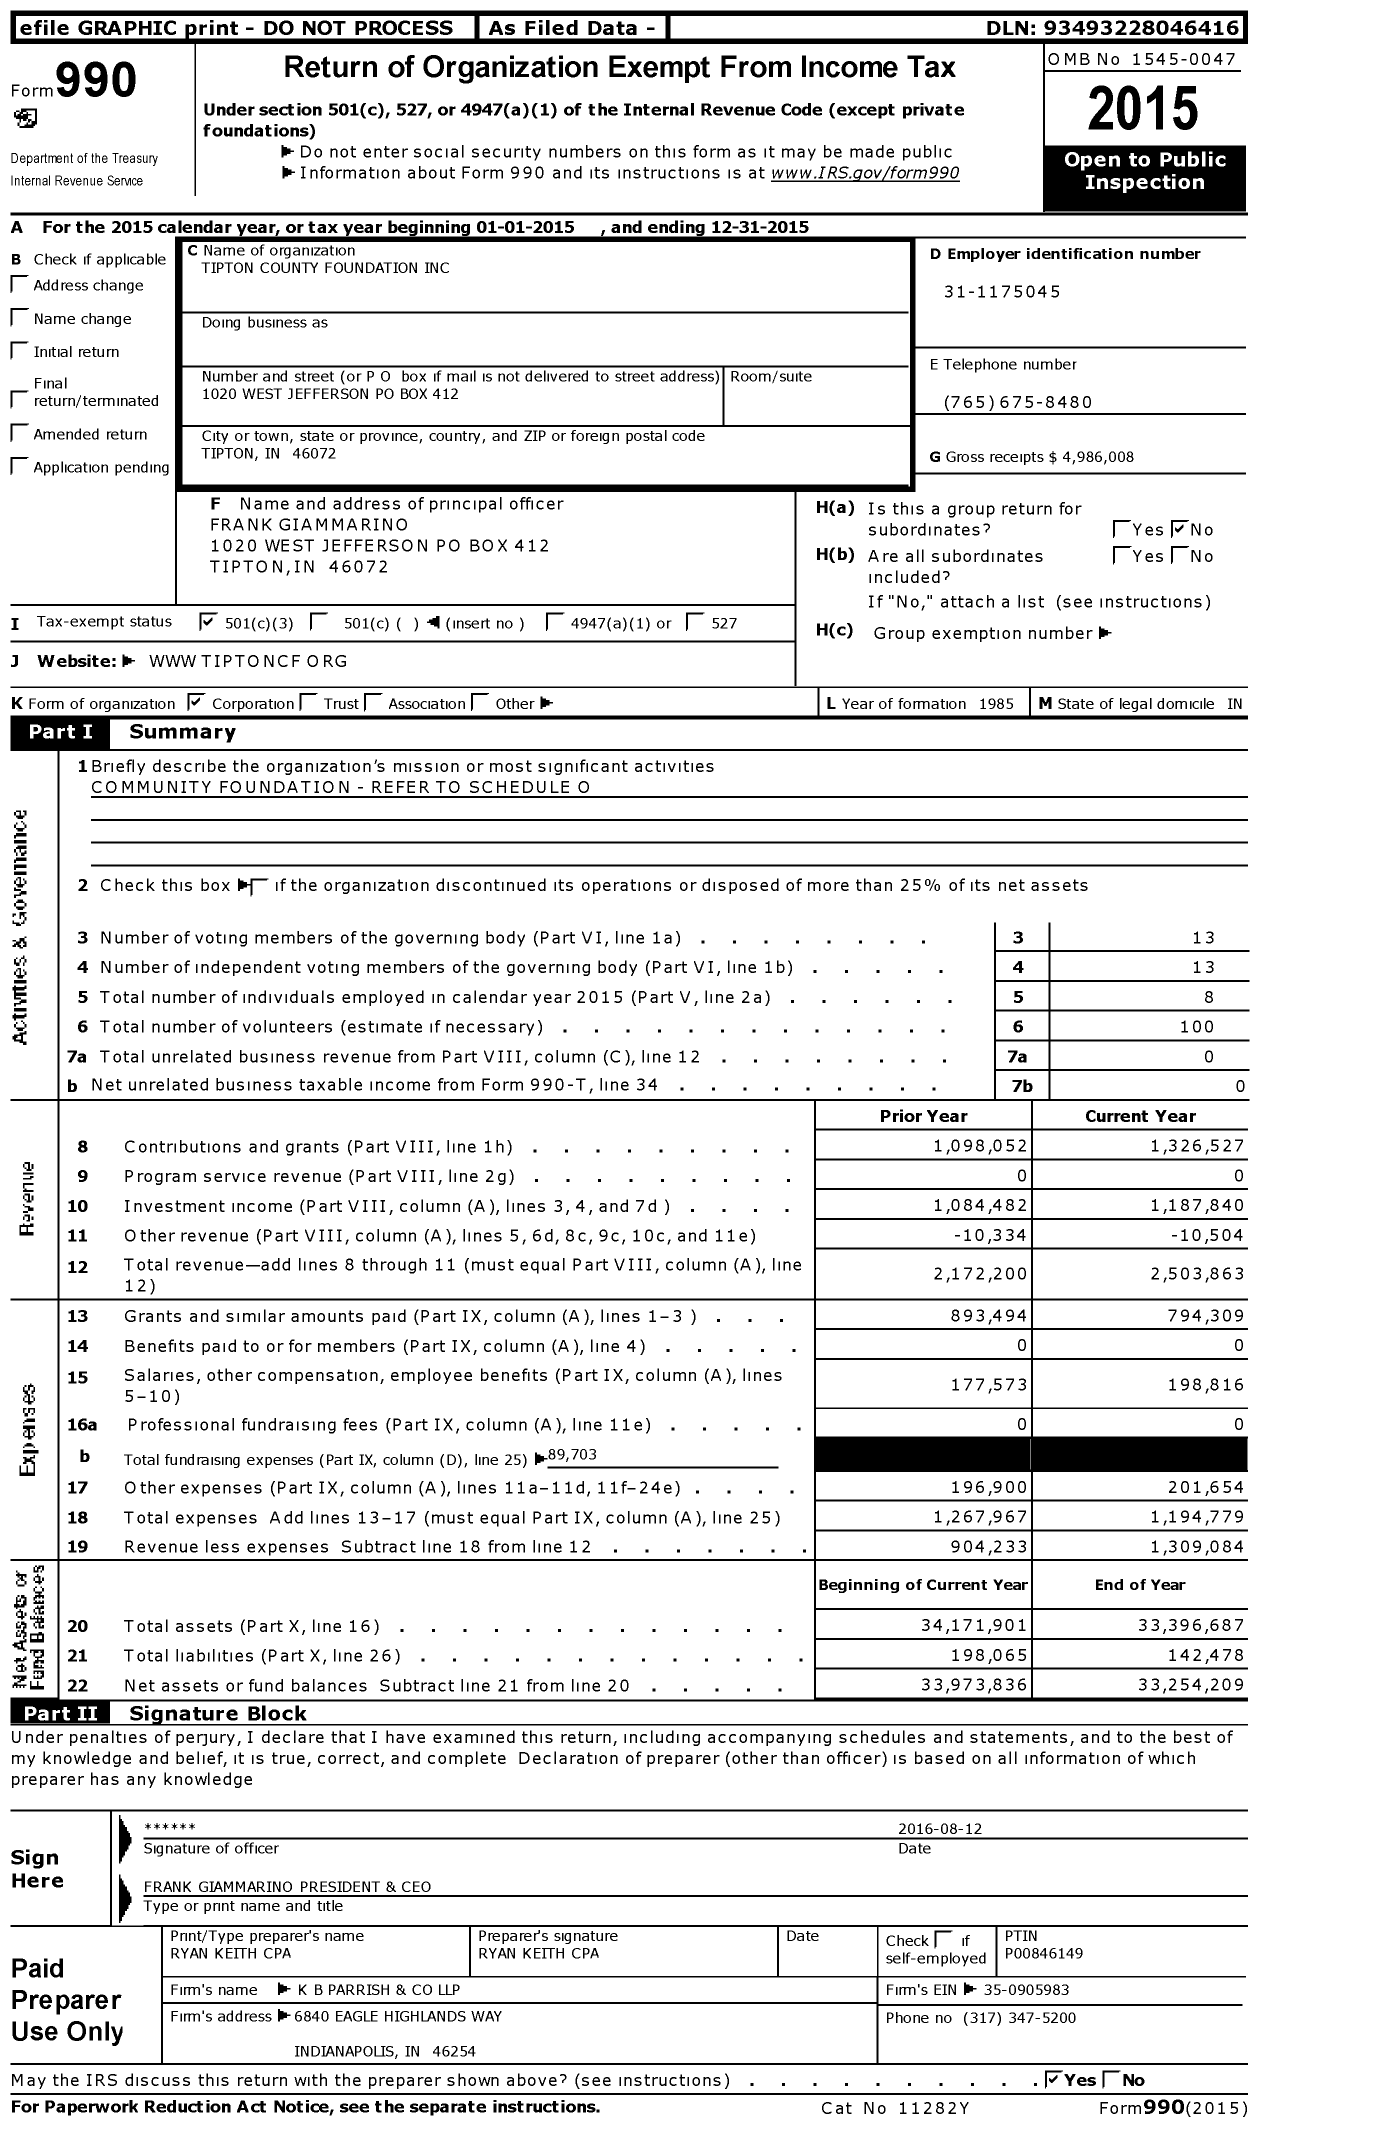 Image of first page of 2015 Form 990 for Tipton County Foundation (TCF)